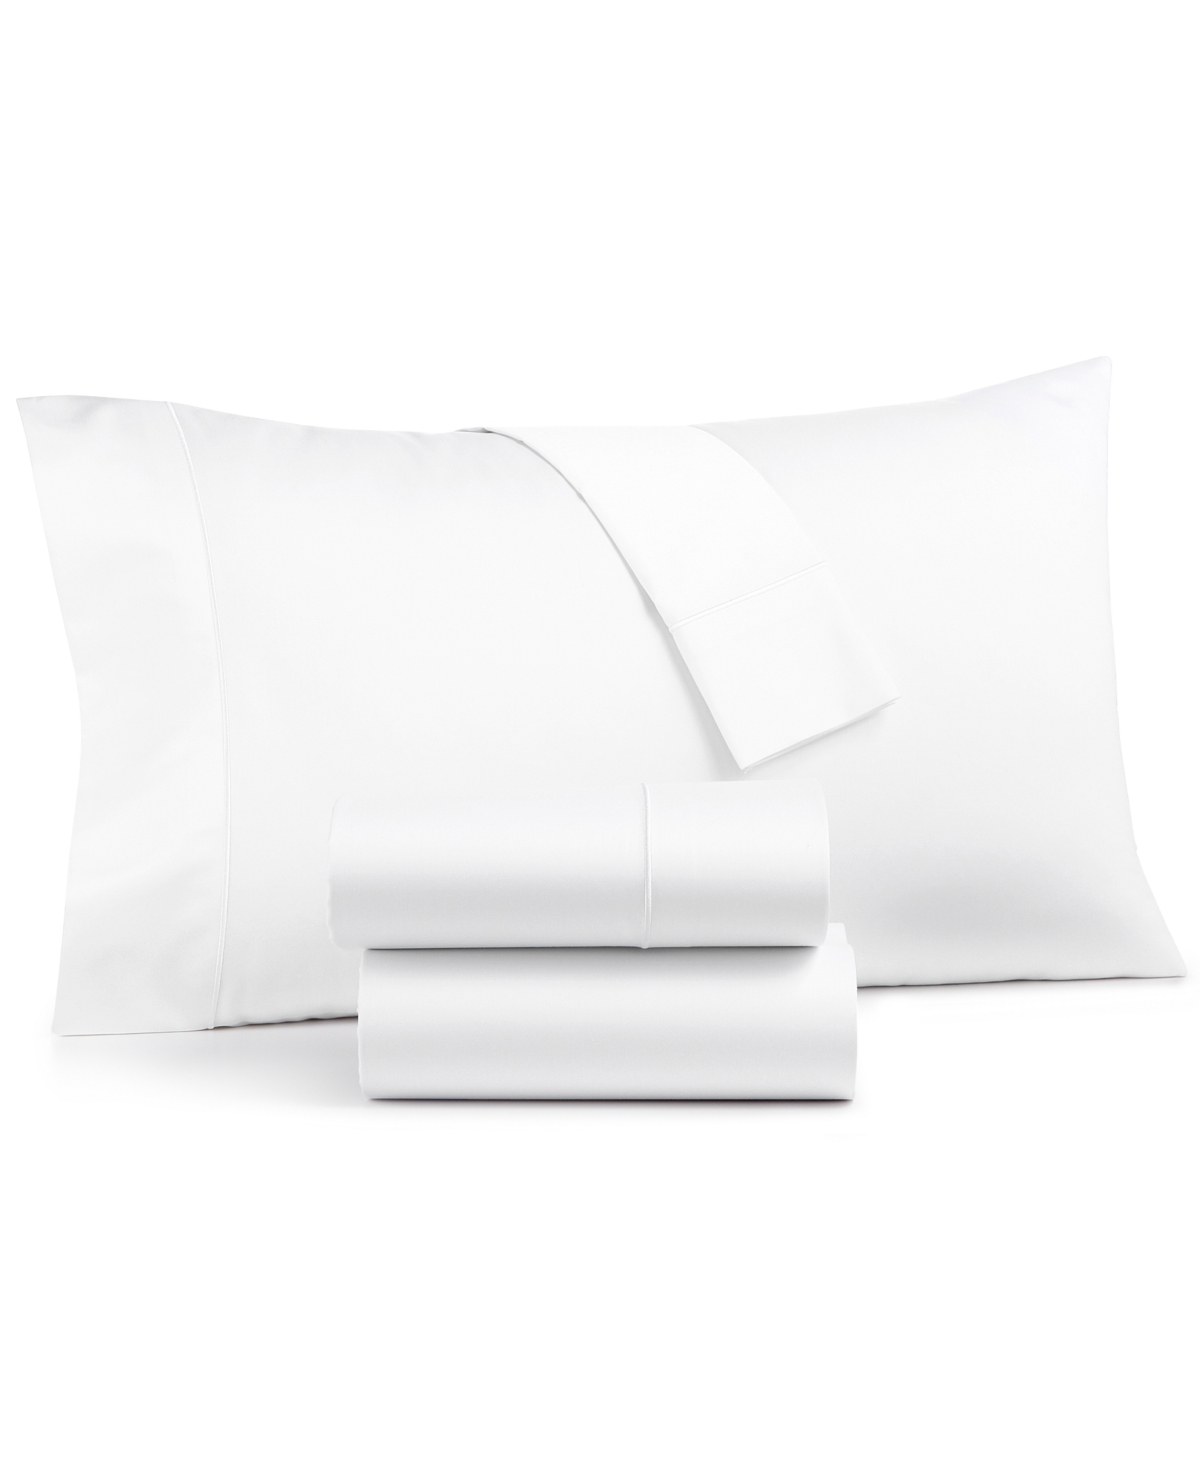 CHARTER CLUB SLEEP LUXE 800 THREAD COUNT 100% COTTON 5-PC. SHEET SET, SPLIT KING, CREATED FOR MACY'S BEDDING